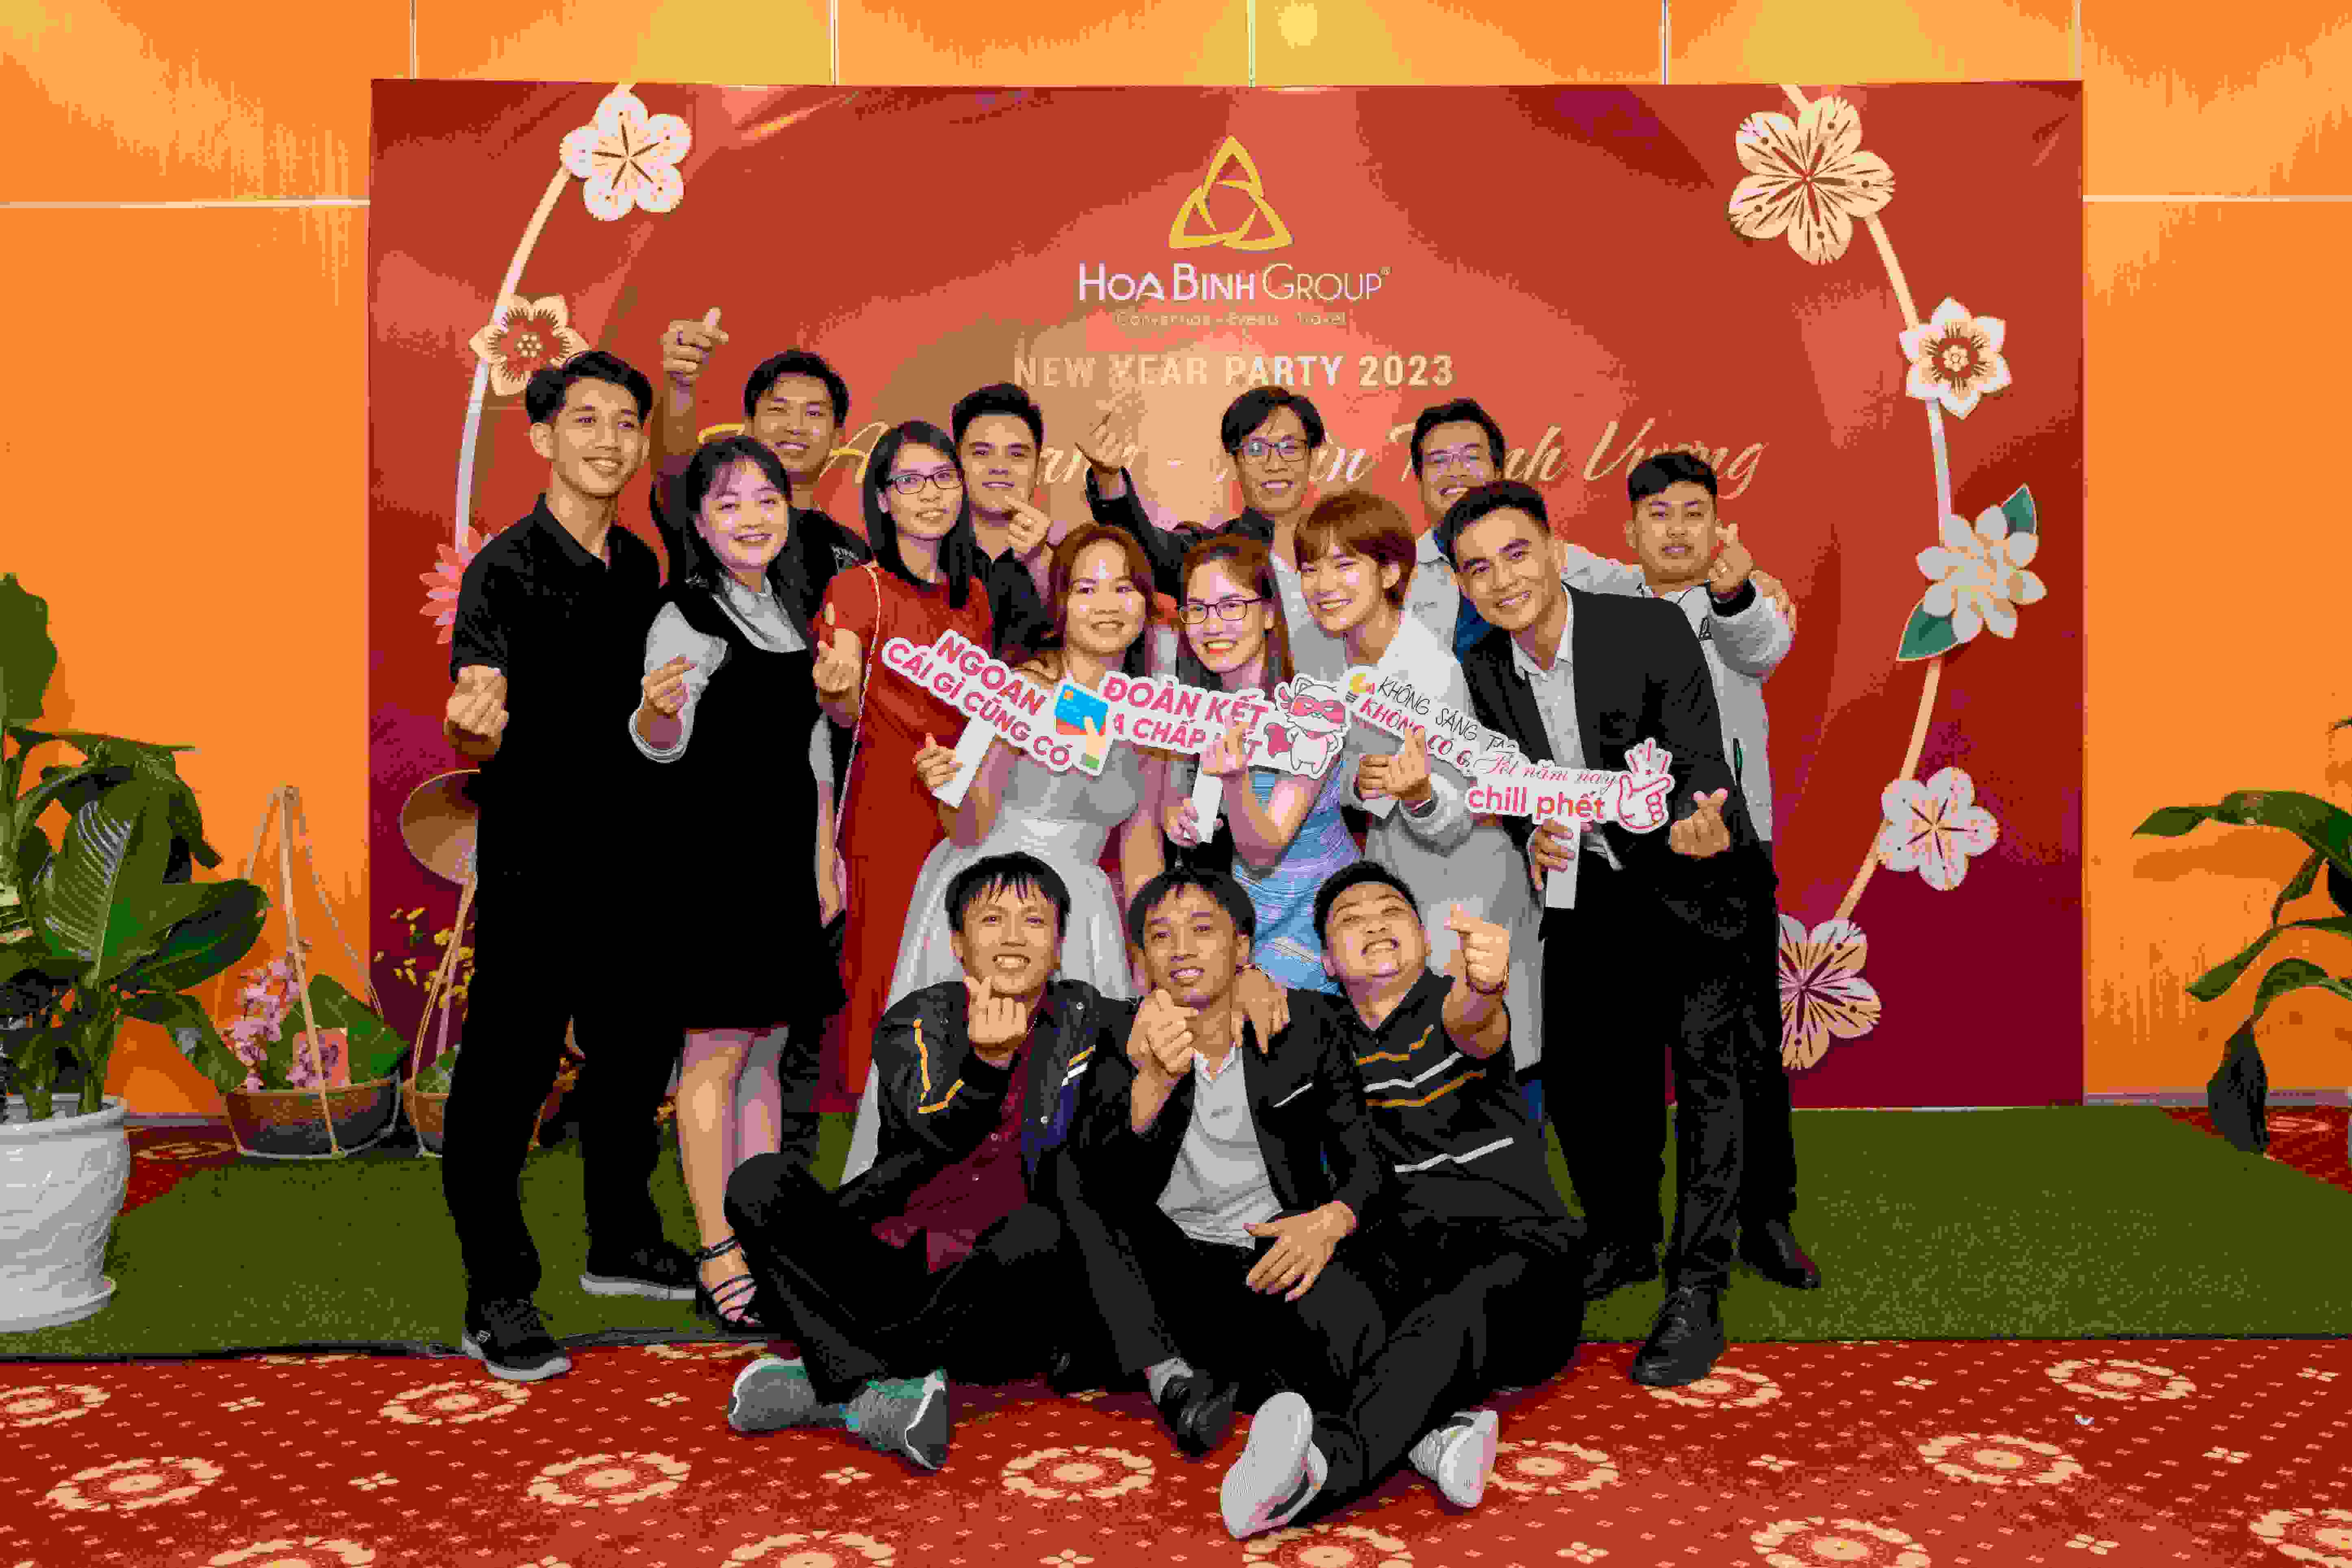 The New Year Party 2023 at the Da Nang branch was also hosted successfully